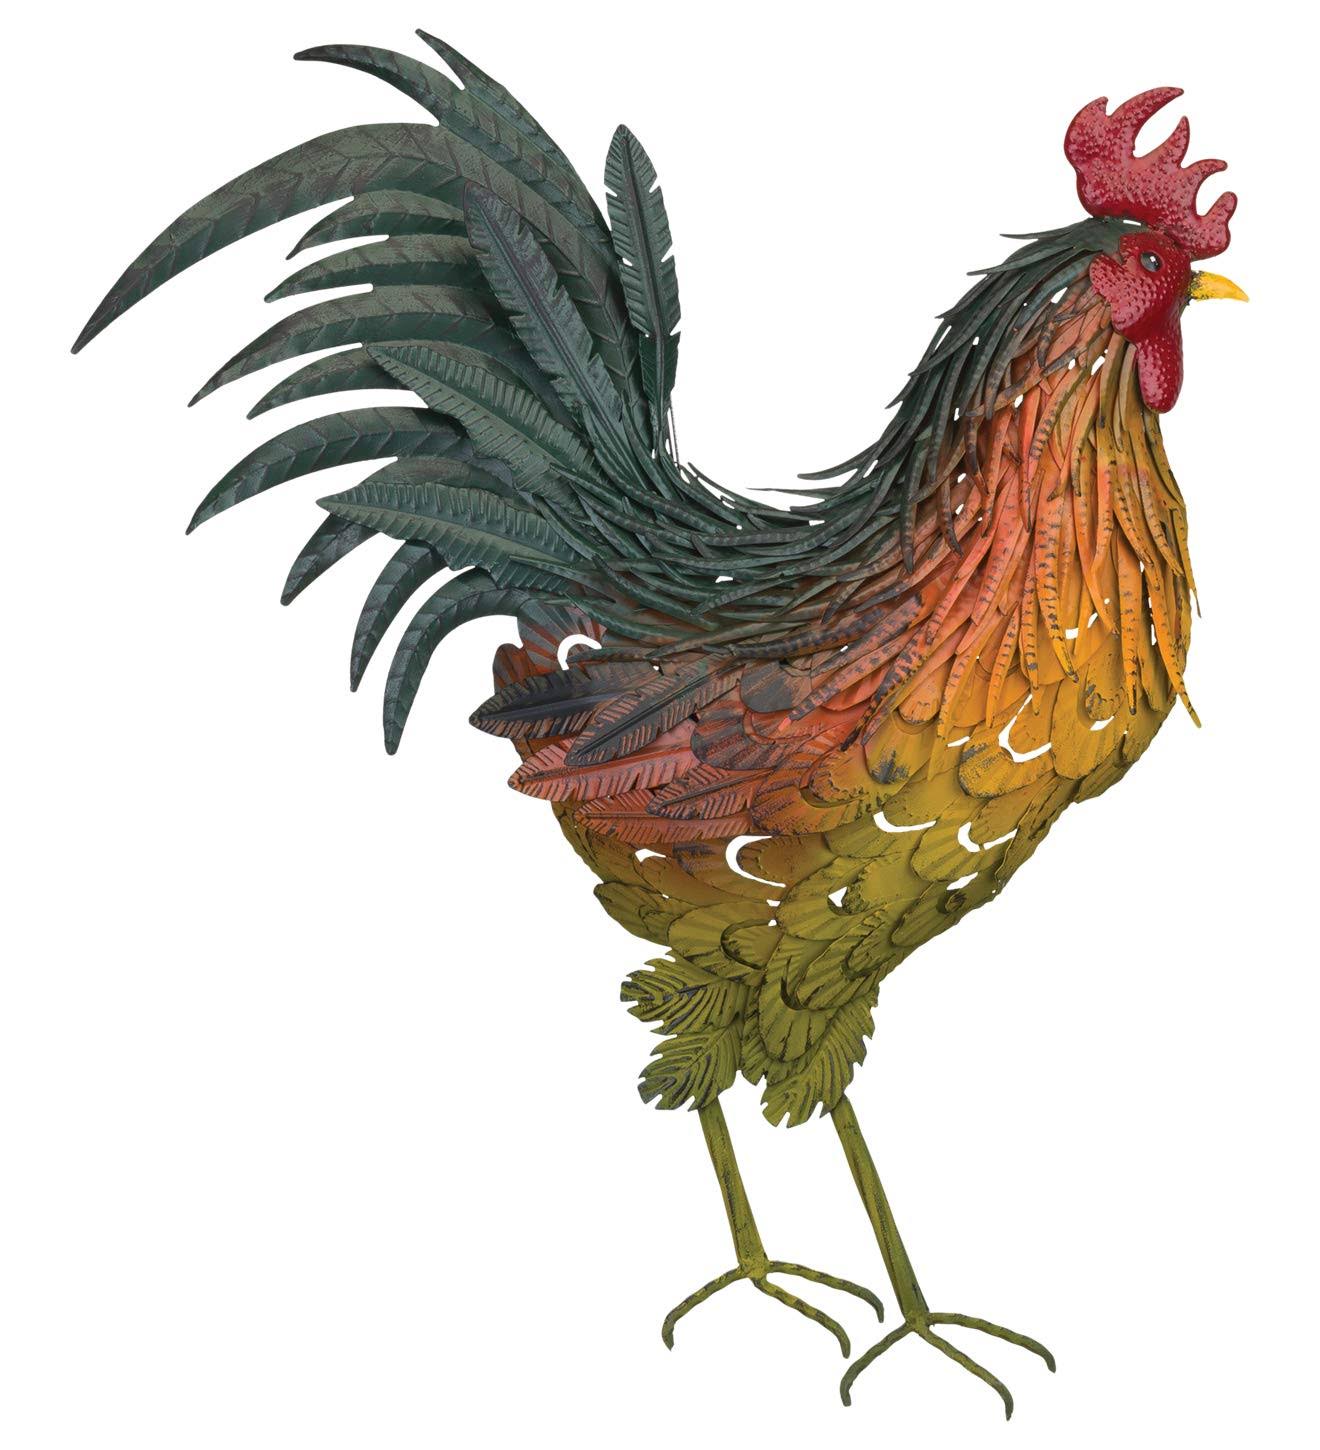 Regal Art & Gift 12603 - Napa Rooster Wall Decor Wall Decor Figurines